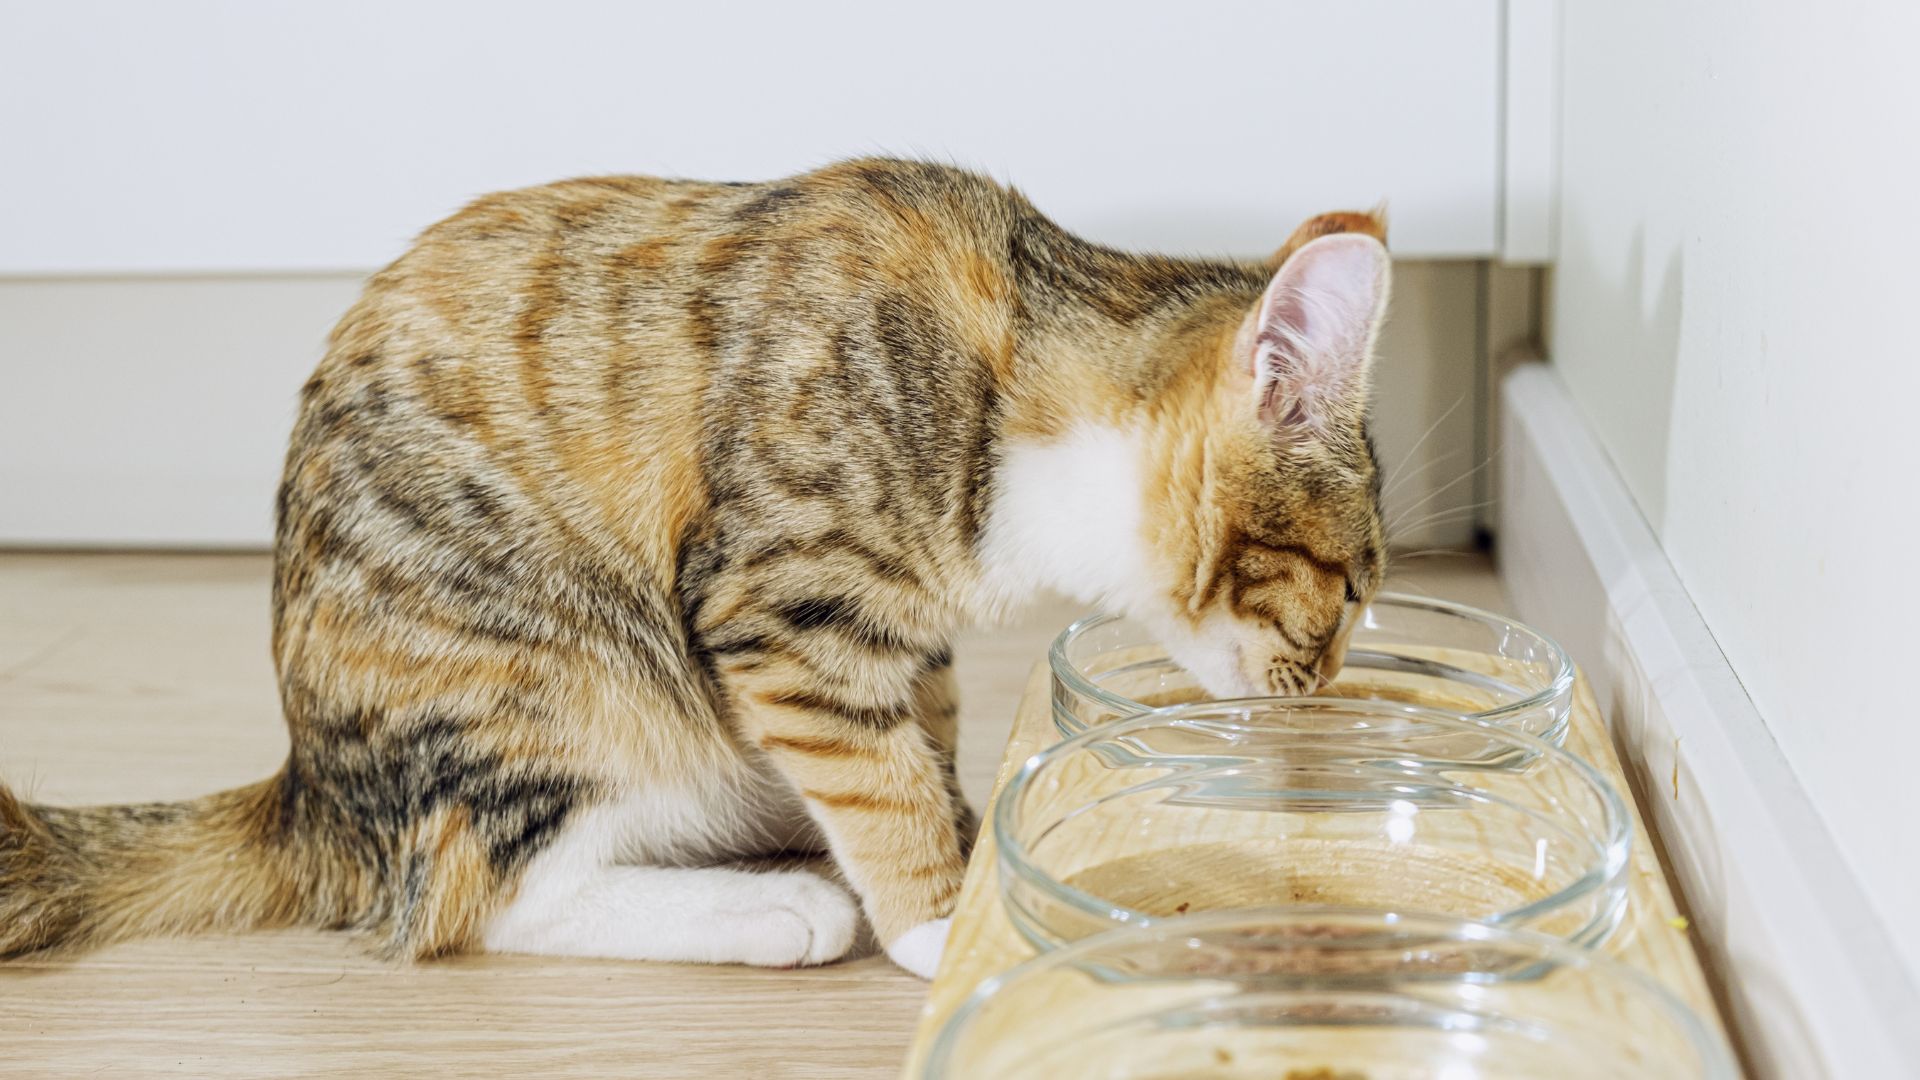 cat sits in front of its bowls and drinks water